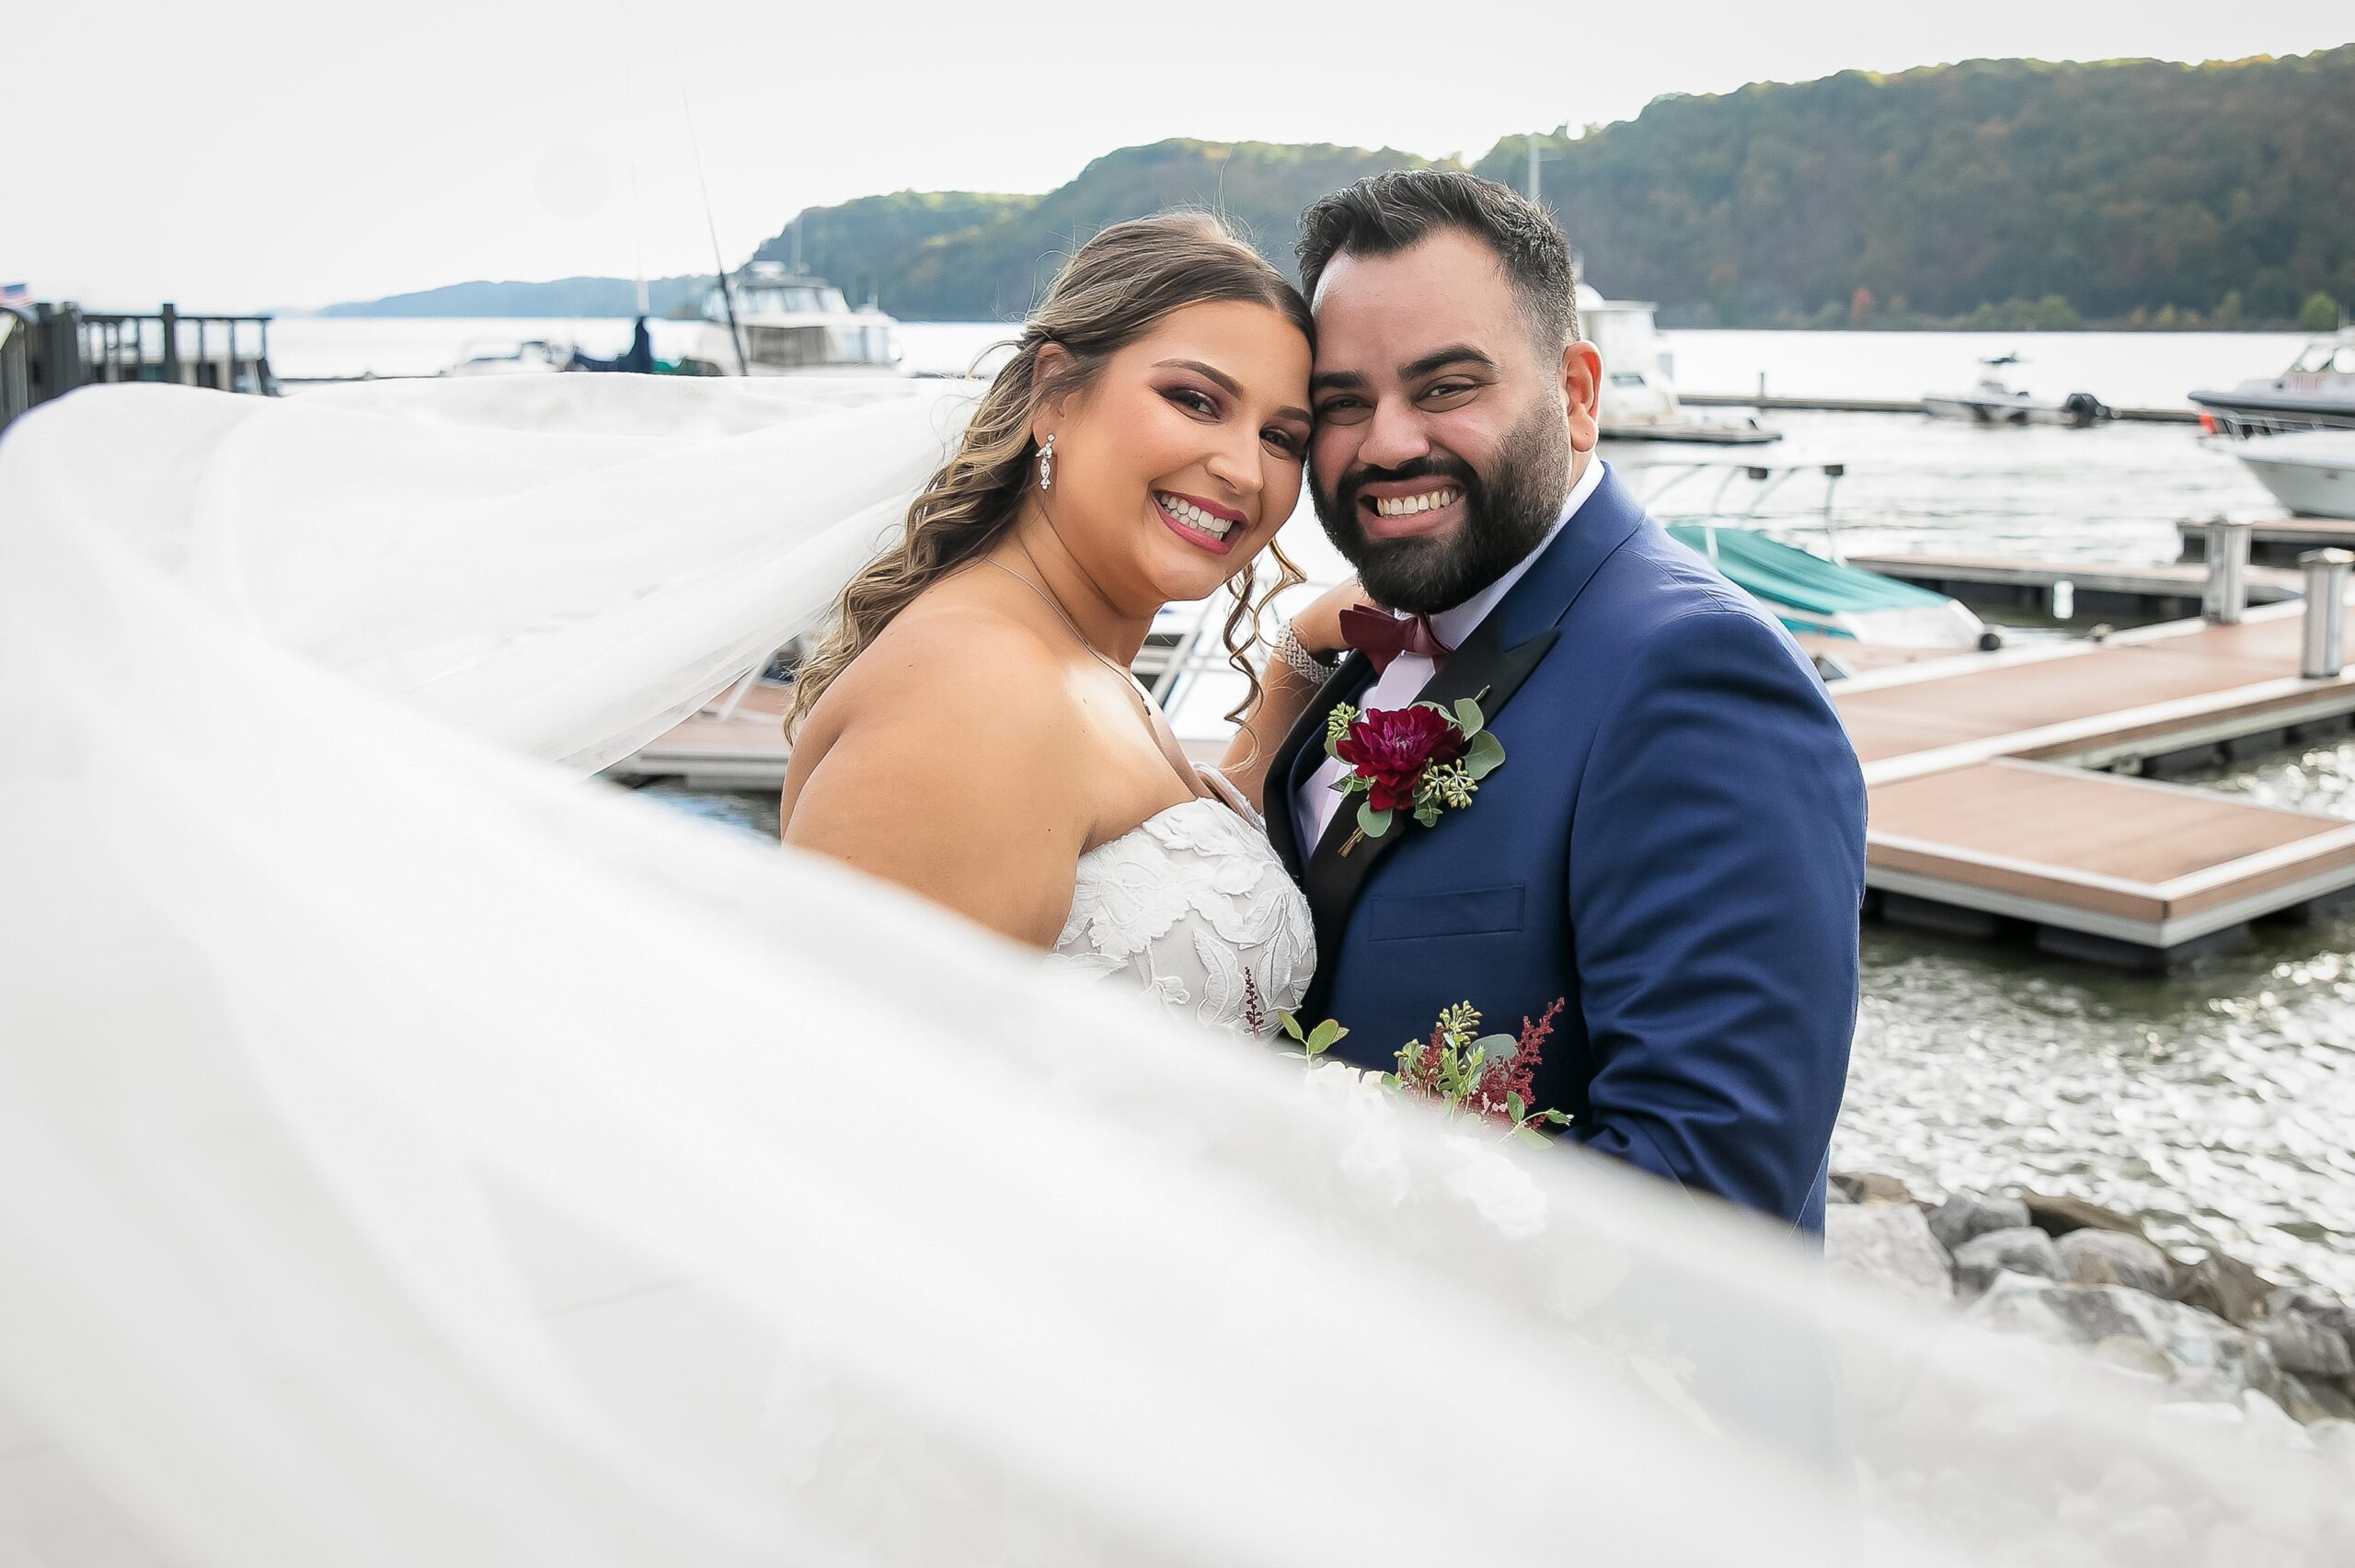 Newlyweds at waterfront wedding venue in Hudson Valley, NY.